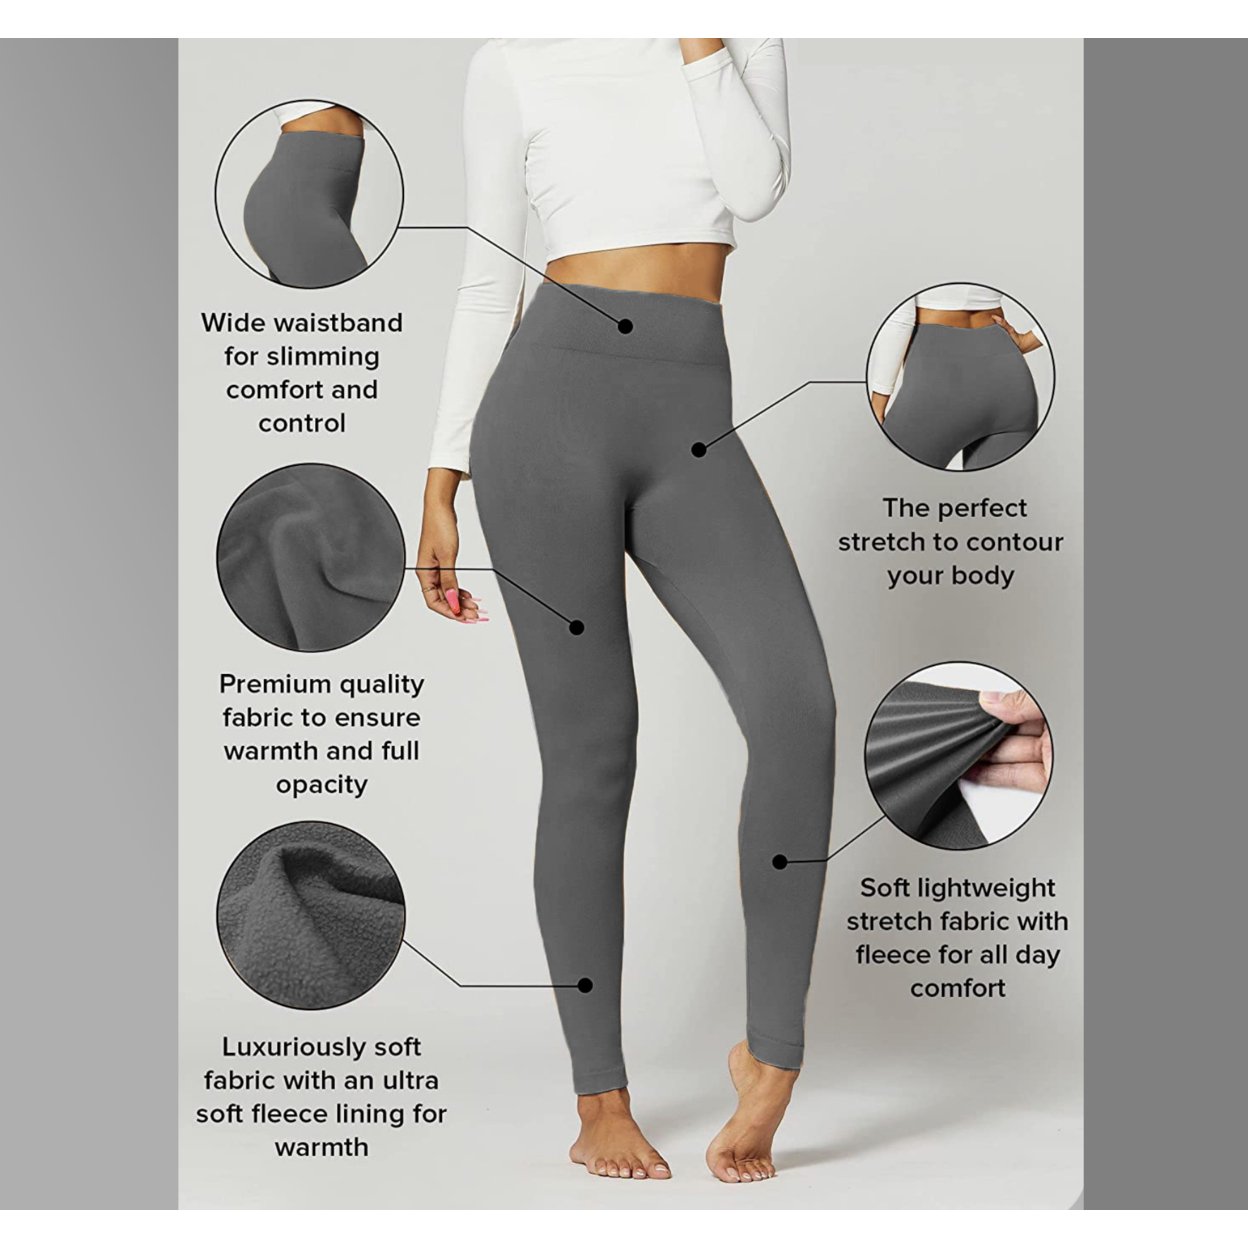 Multipack - High-Waisted Premium Quality Fleece Lined Leggings (S-4X) - Small/Medium, 1-Pack, Grey